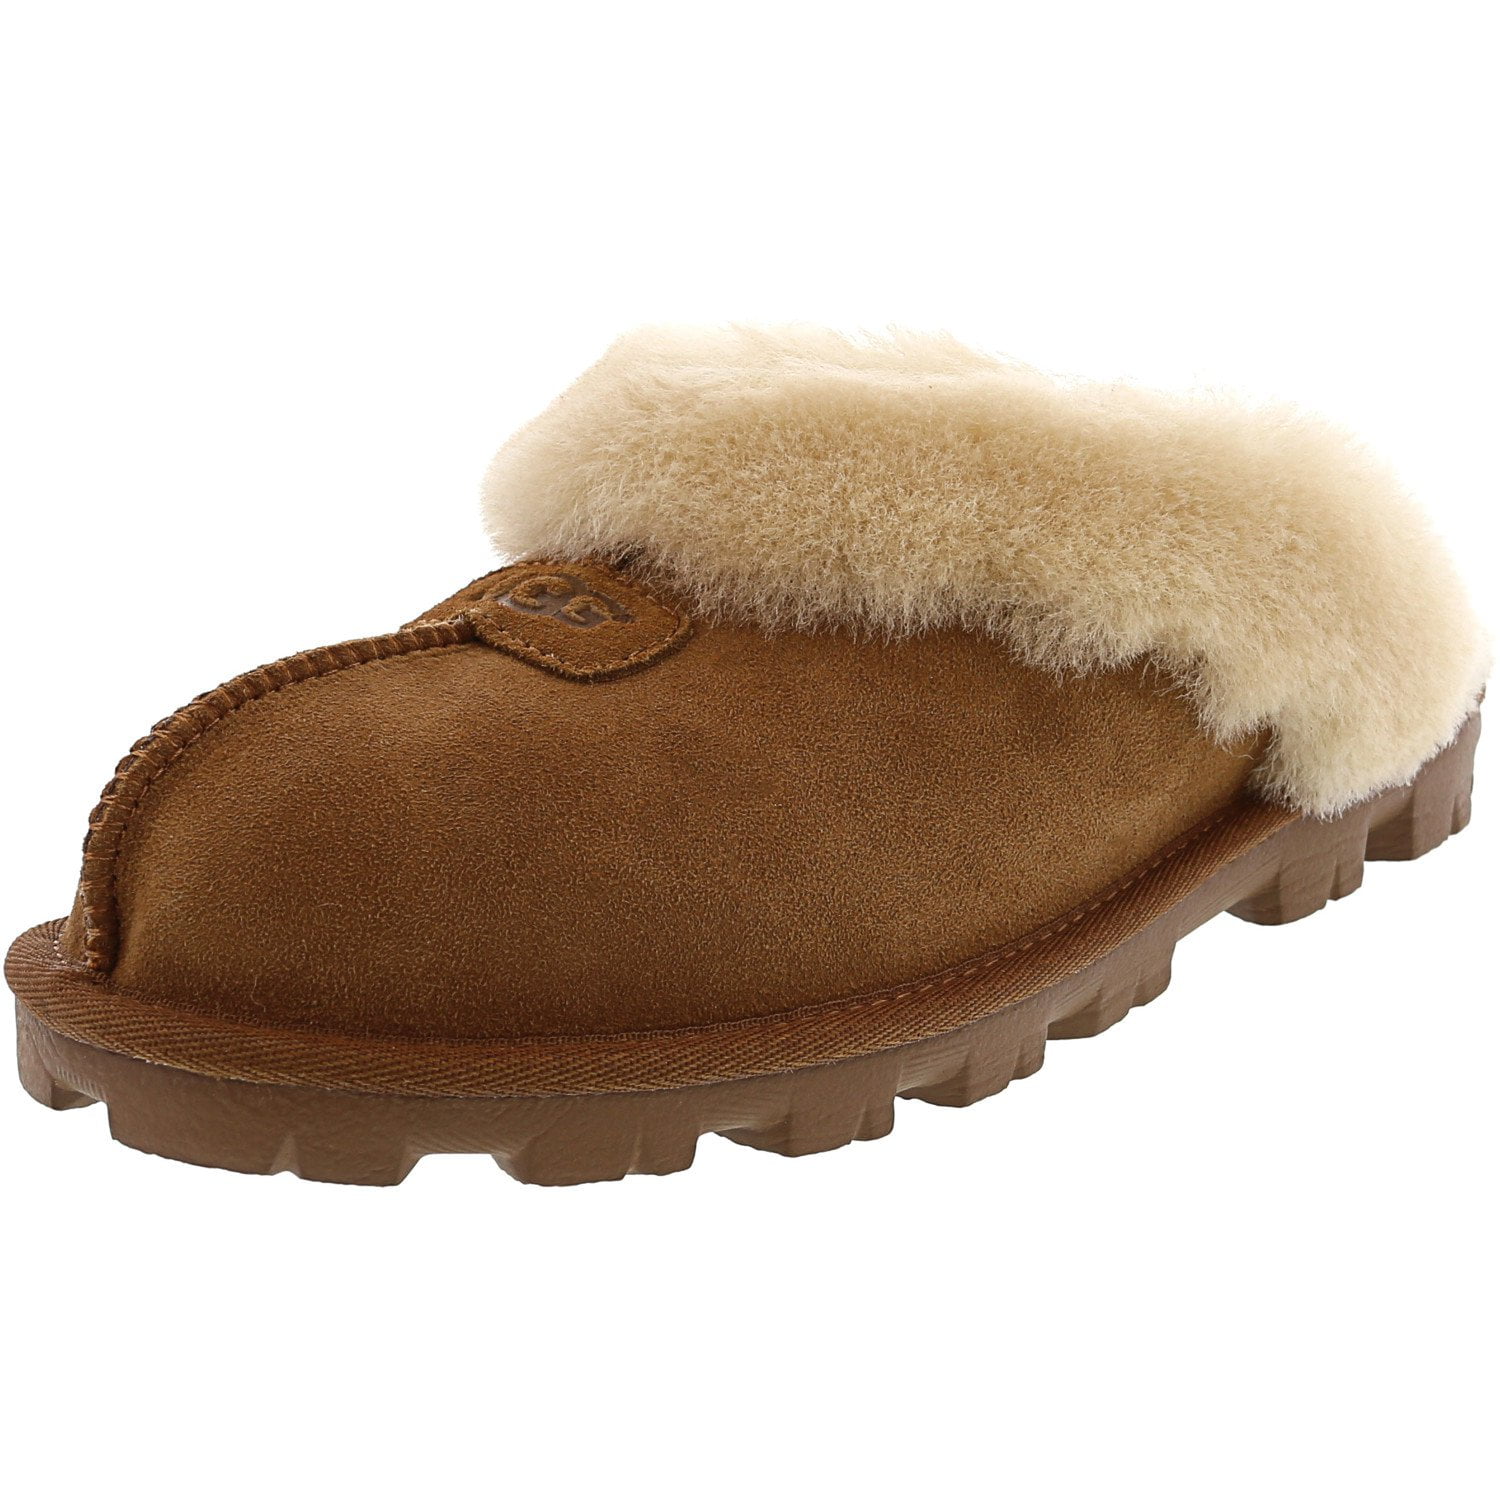 womens ugg slippers size 7